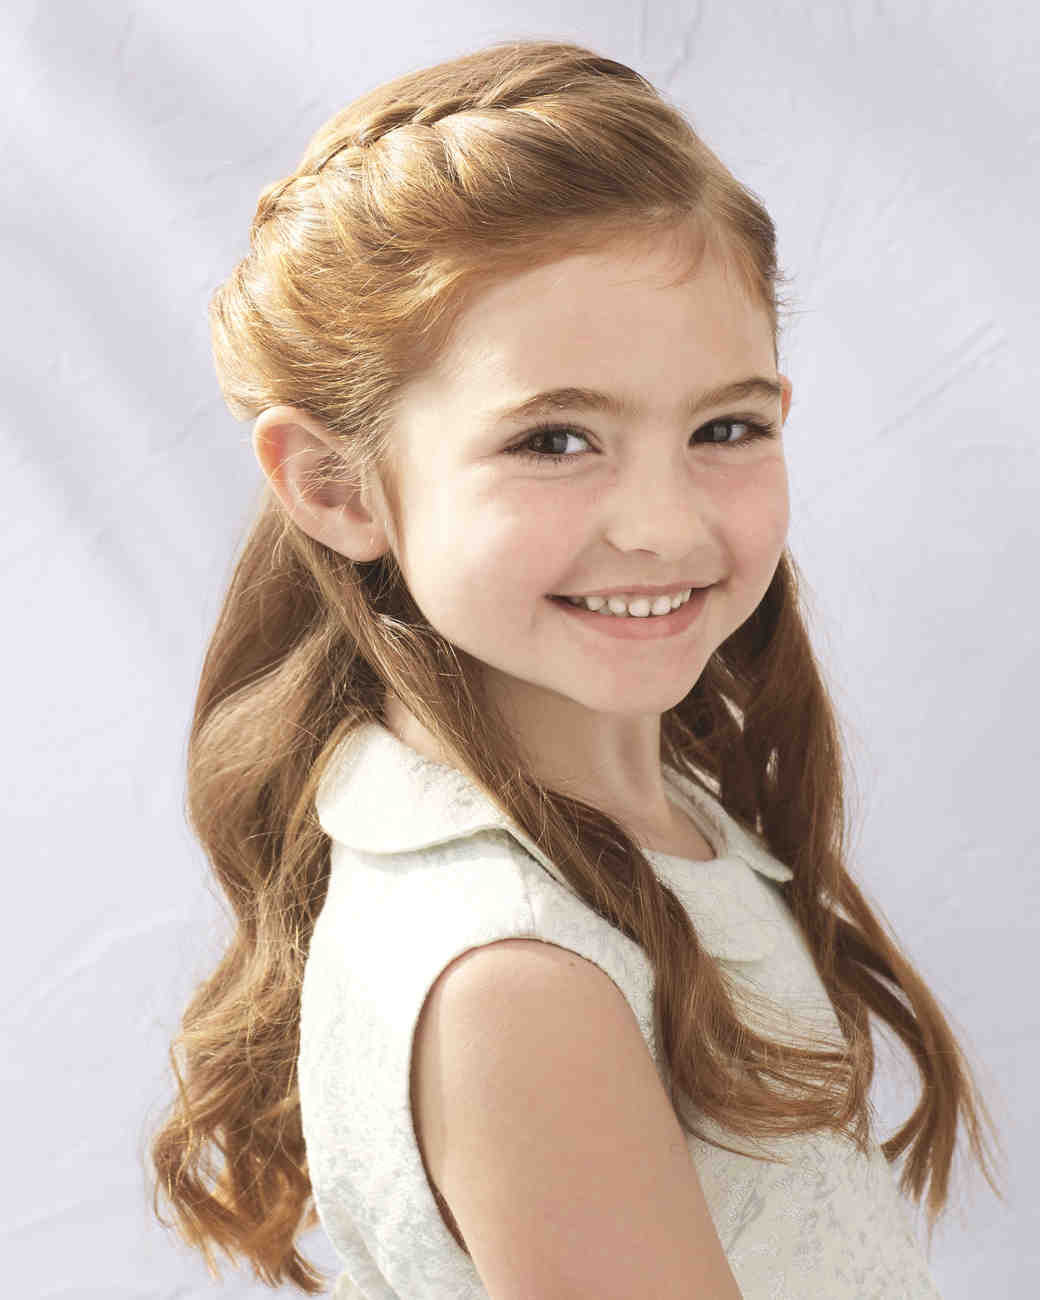 Pictures Of Hairstyles For Girls
 Flower Girl Hairstyles That Are Cute and fy